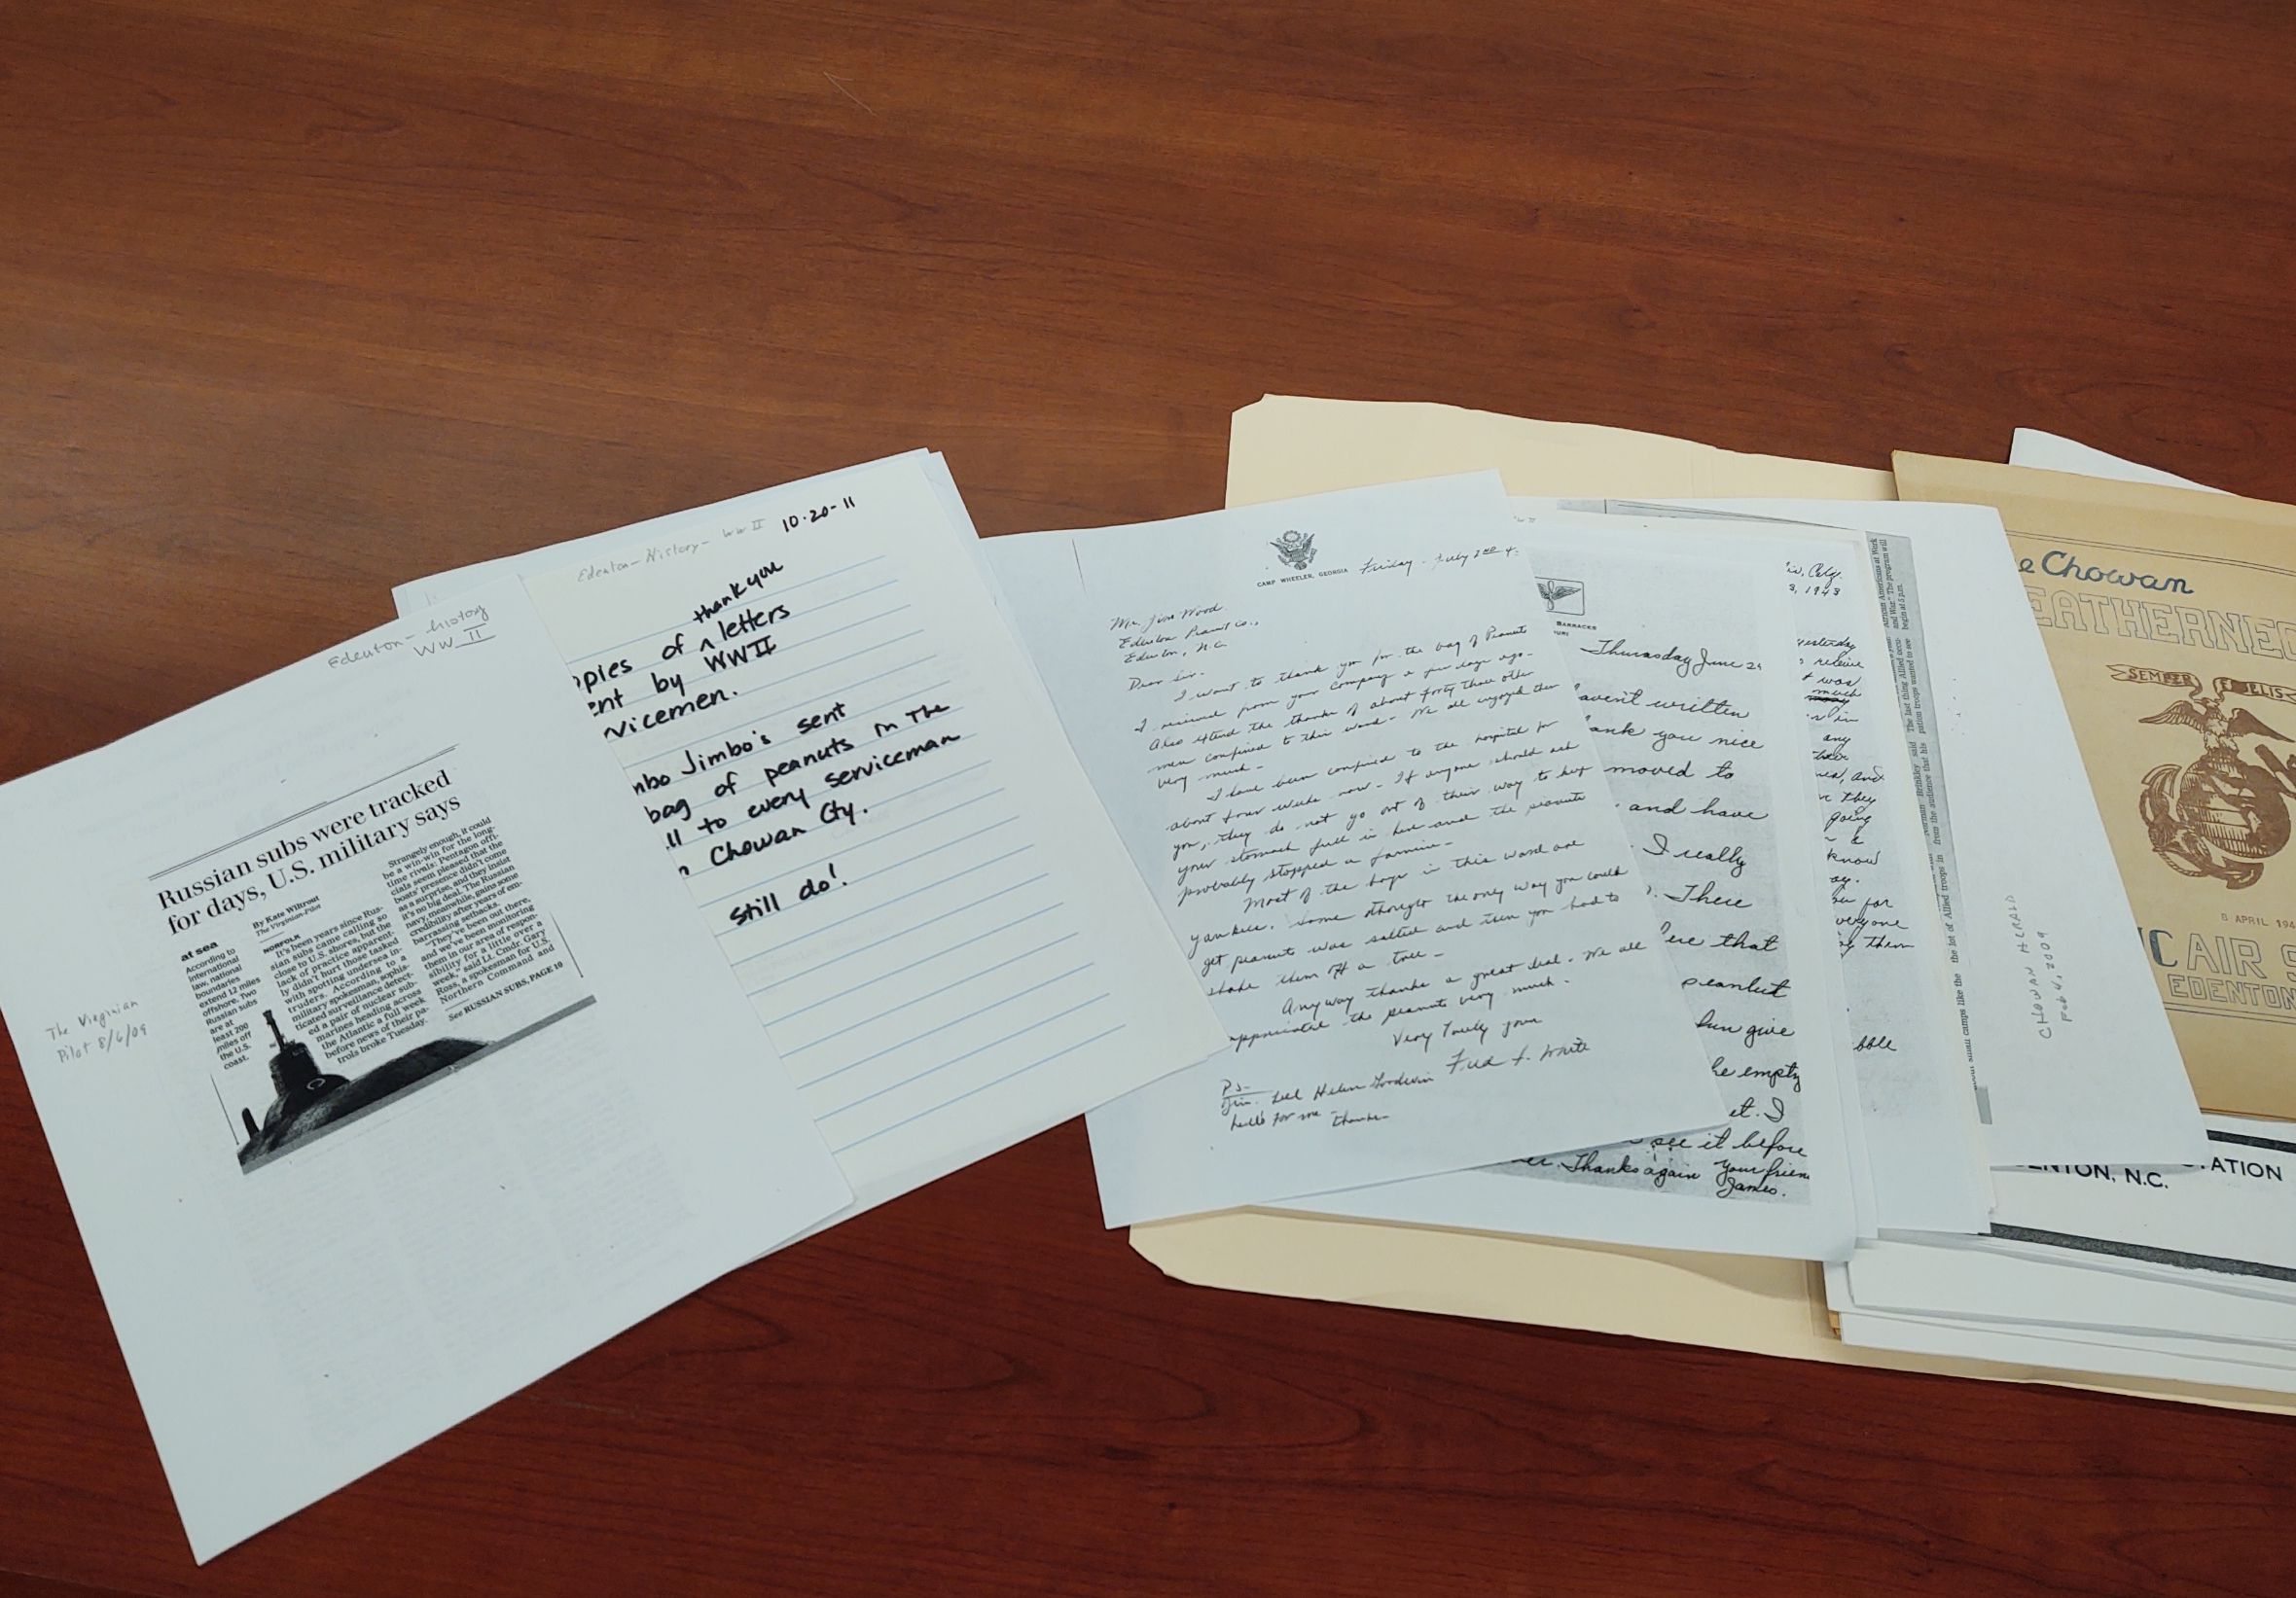 photocopies and papers from a manila folder spread on a wooden table